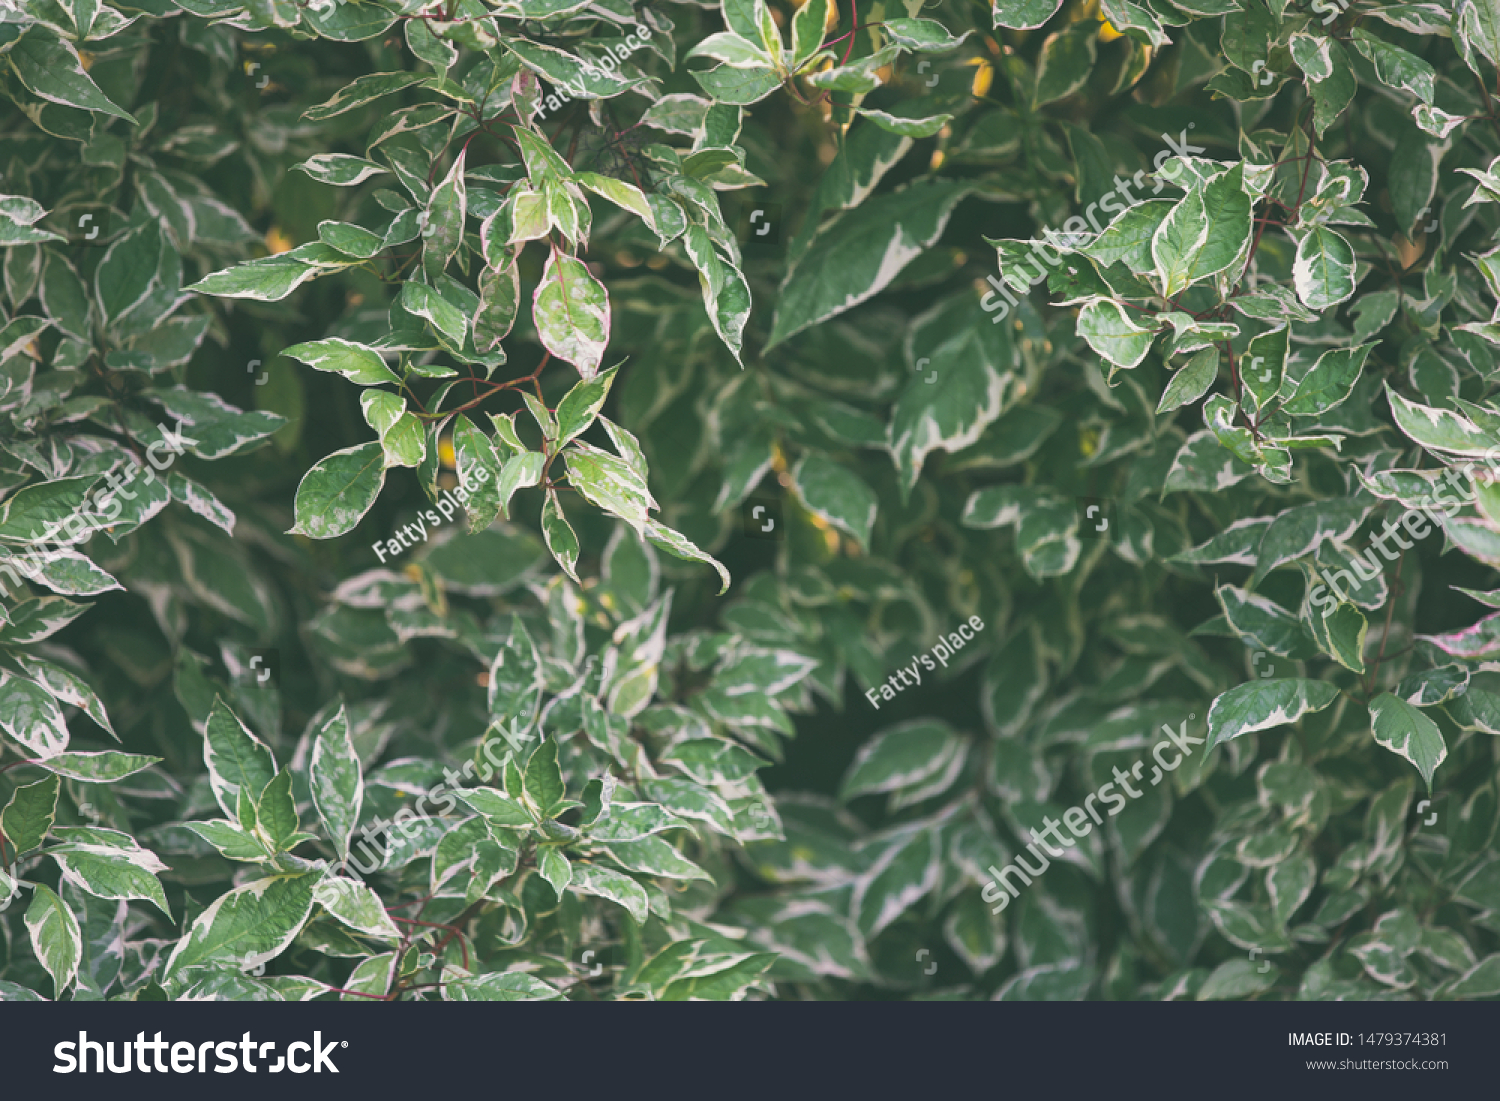 Green botany background, front view on low key fresh foliage #1479374381